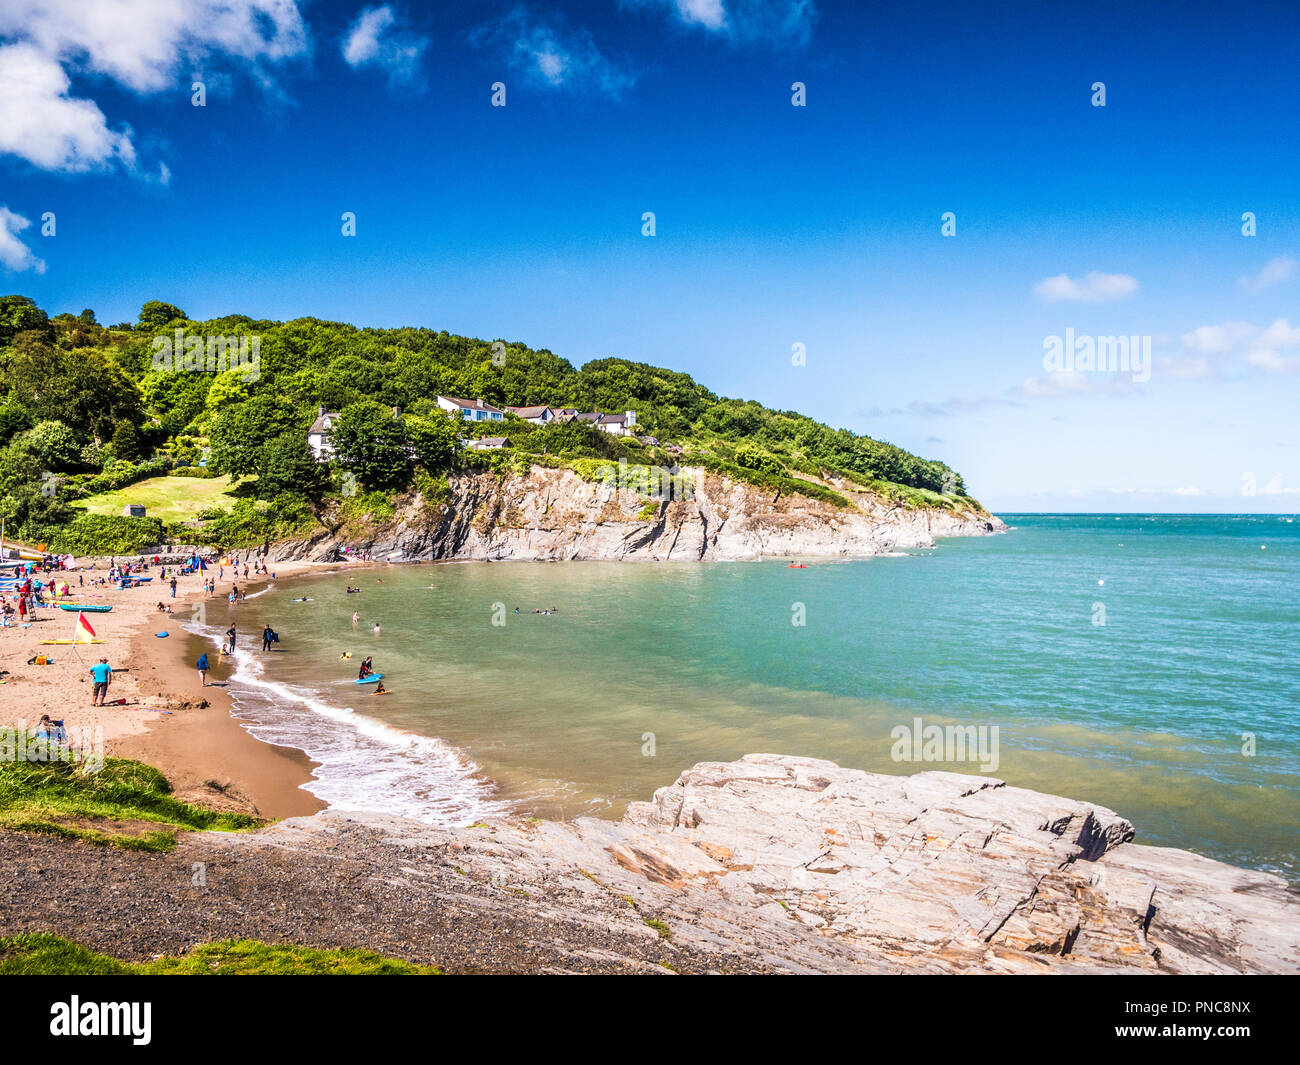 The bay at Aberporth on the Welsh coast in Ceredigion. Stock Photo